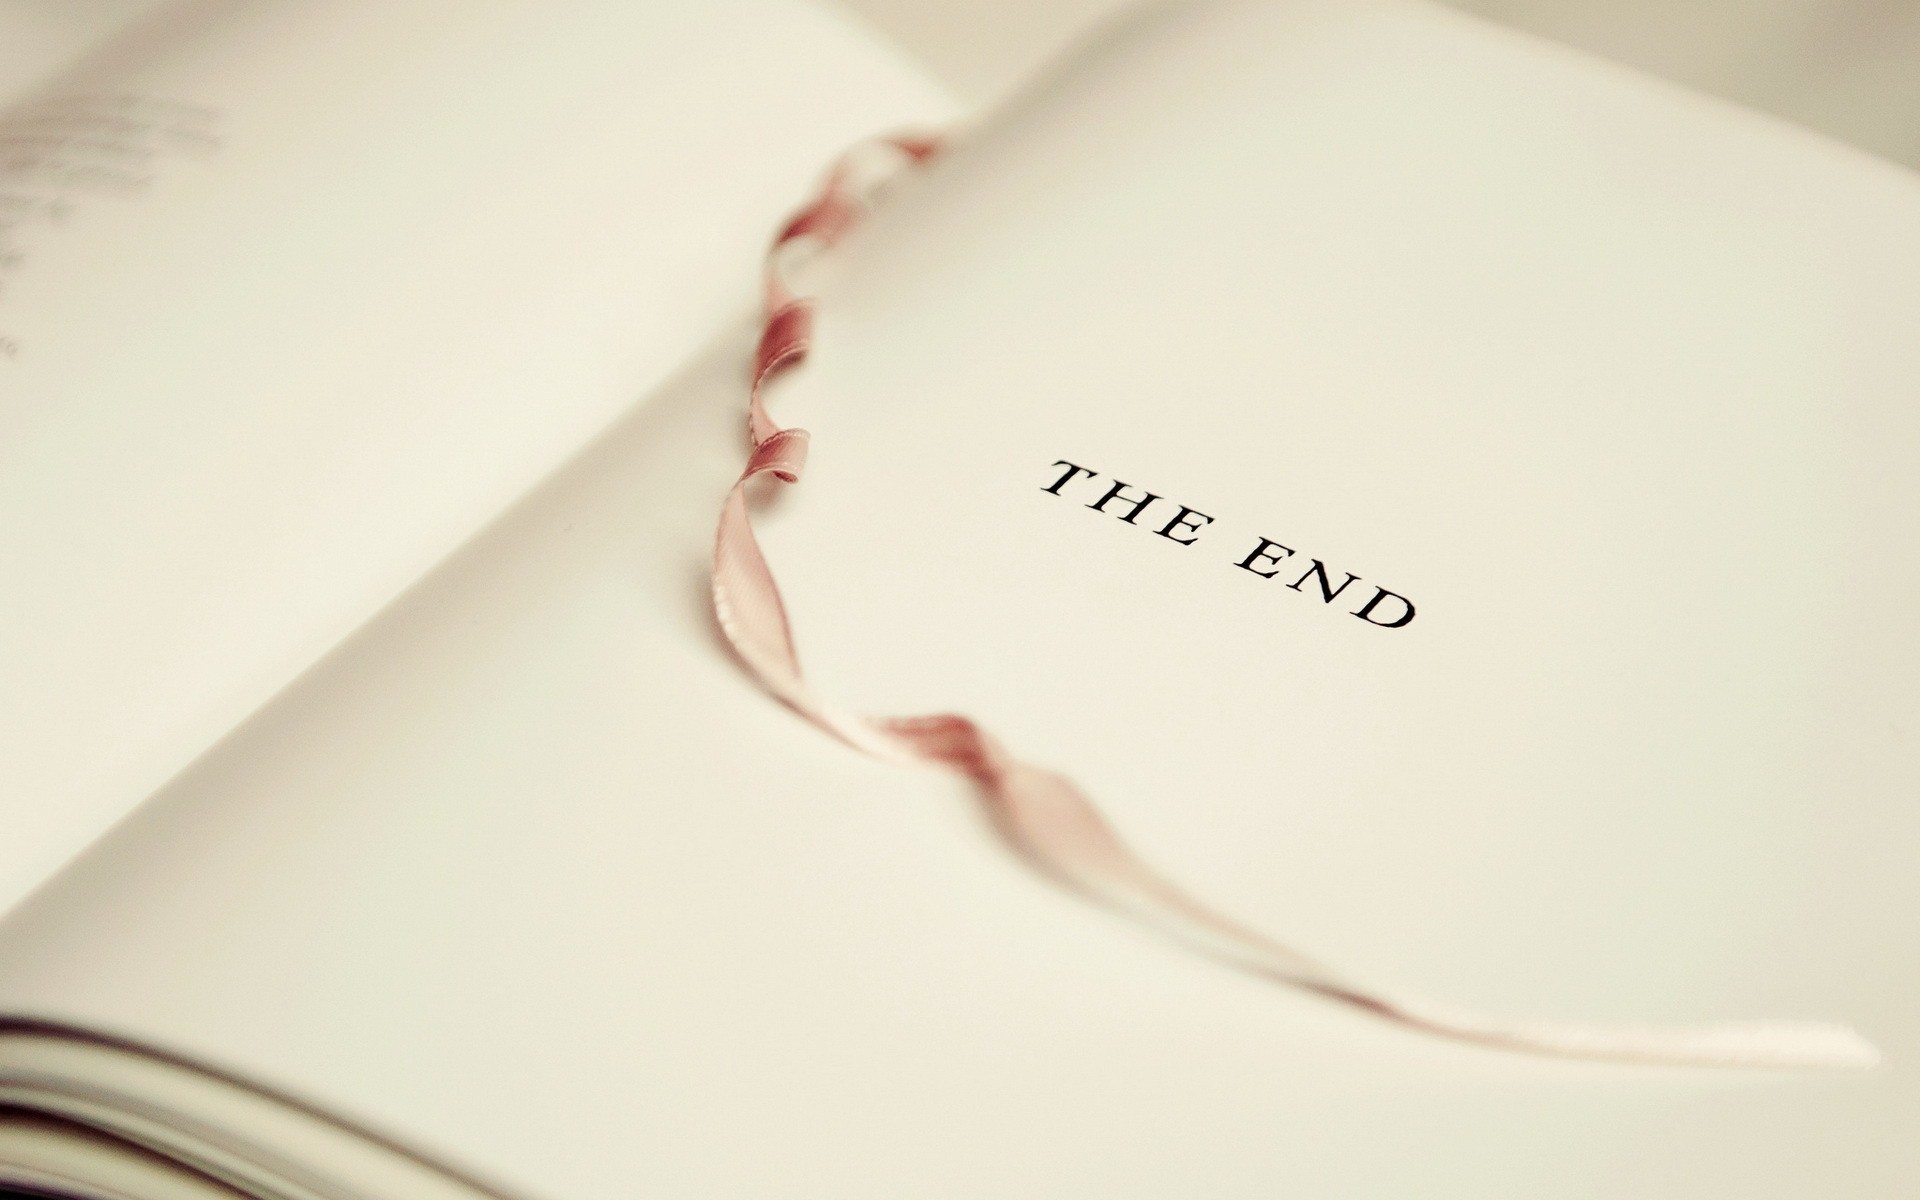 1920x1200 ... the end book page silk bookmark hd wallpaper desktop background hd  1920x1080the end book page silk